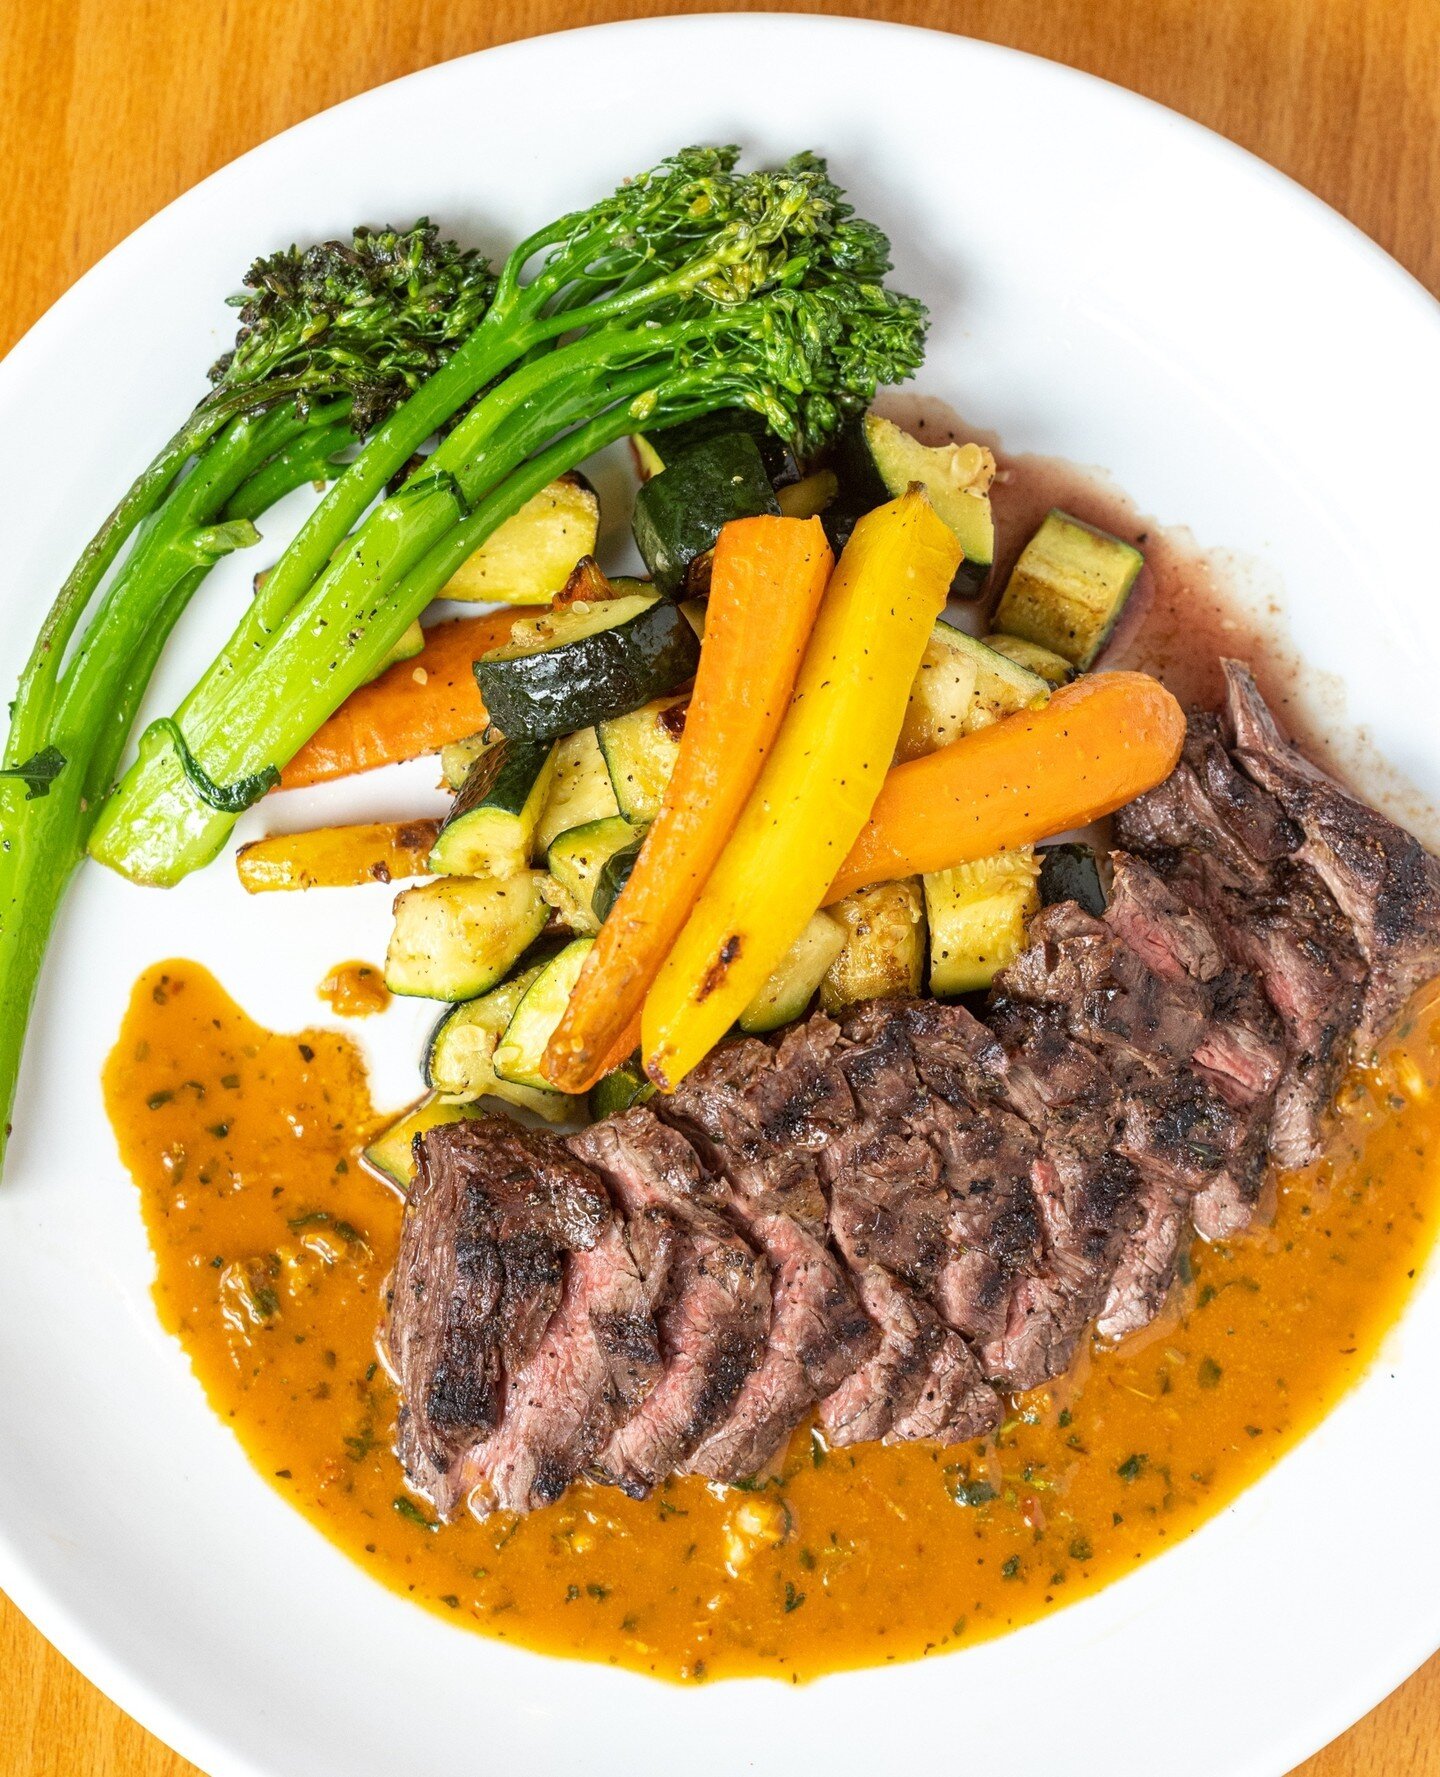 Join us for dinner and try our Marinated Skirt Steak with house-made Chimichurri, Summer Vegetable Medley, and Fresh Broccolini. ⁠
⁠
At Sweet Grass Grill, we deliver delicious culinary experiences while sourcing our produce and ingredients consciousl